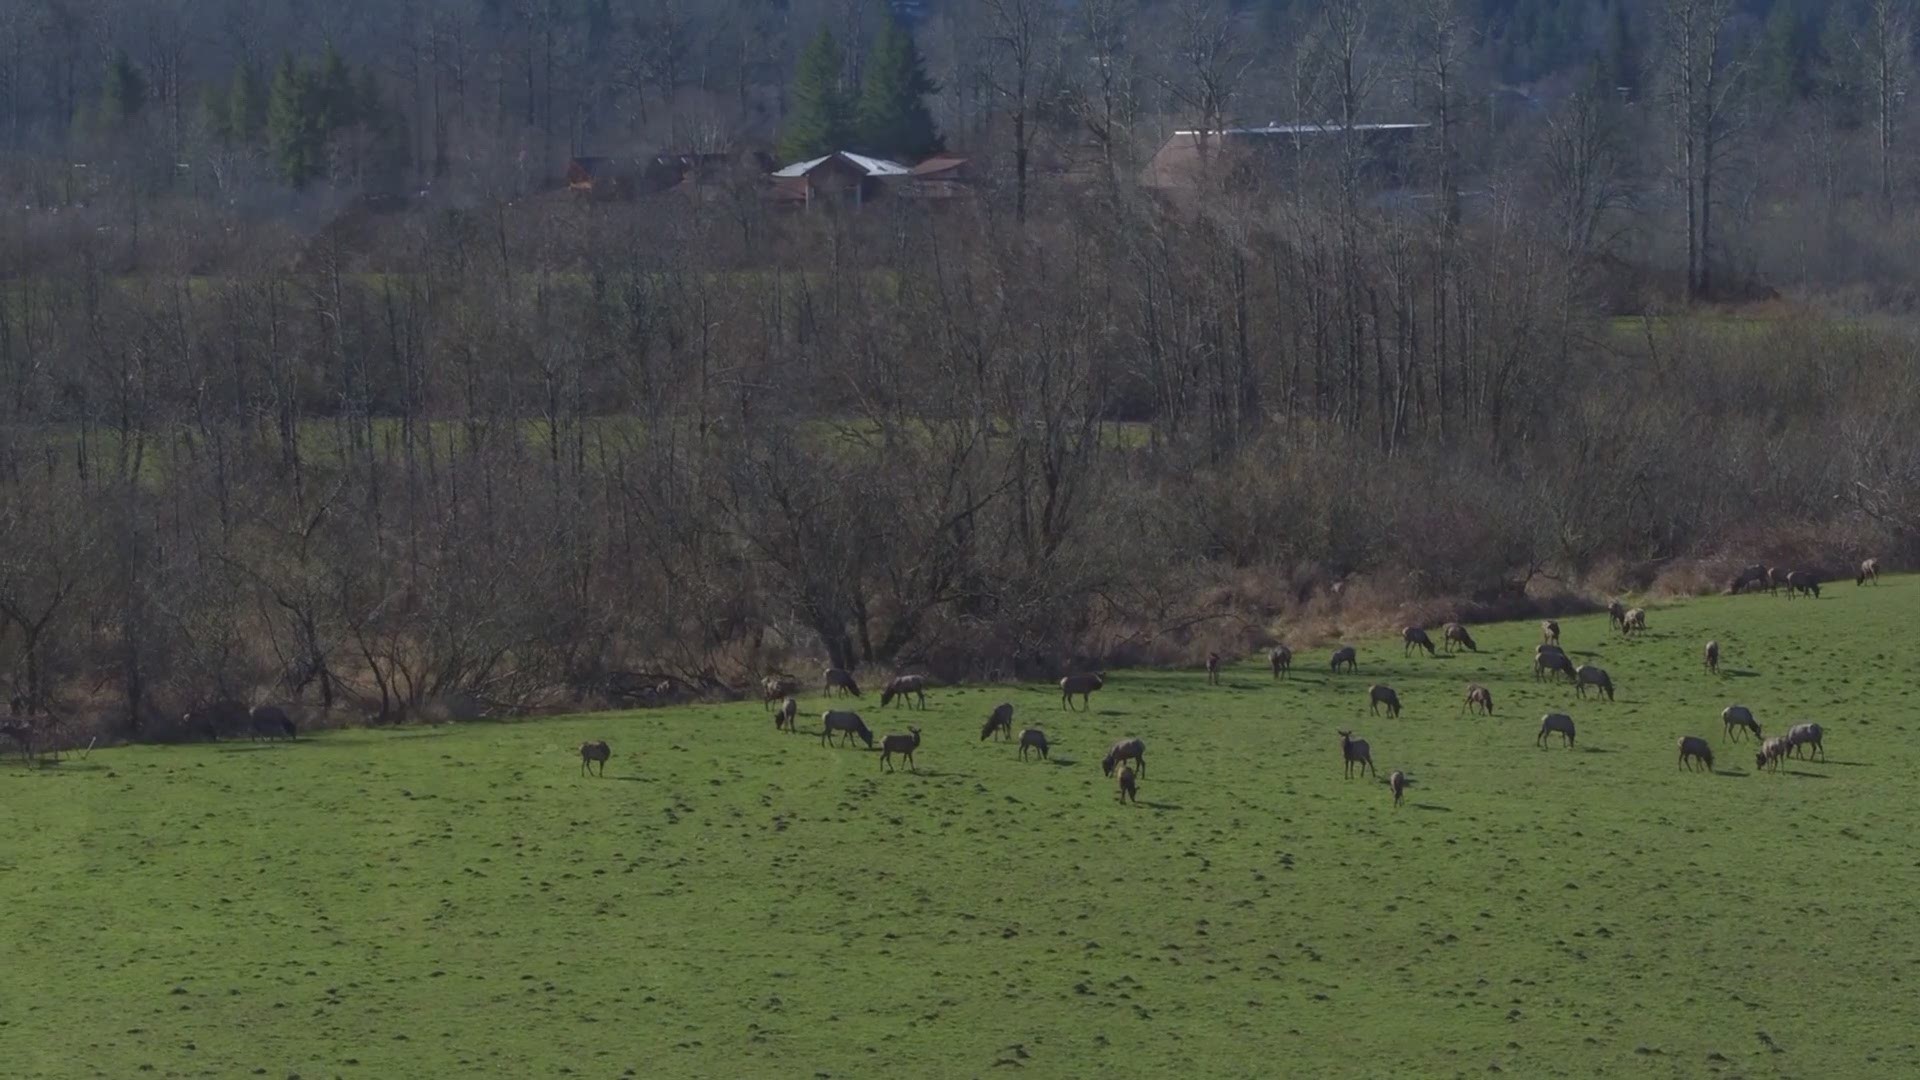 "Dexter" the KING 5 drone discovered a herd of elk near Mount Si on a sunny Tuesday in Western Washington. Footage taken March 6, 2018.